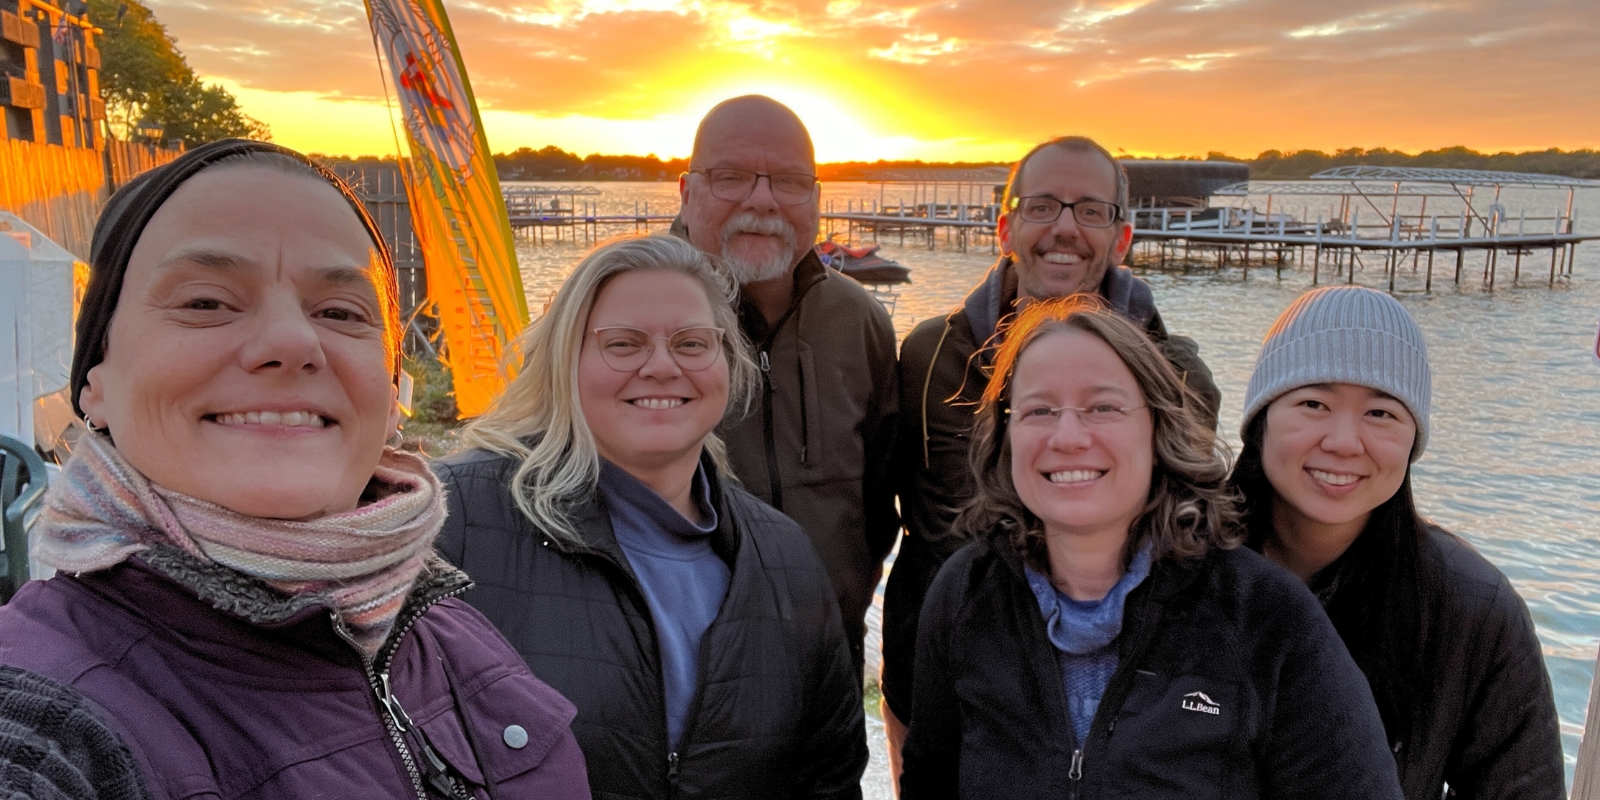 AOS Staff at 2023 Retreat in Illinois. From left to right: Chris Anne, Crystal, Mark, Chris, Judith, and Mint with sunset over lake in background